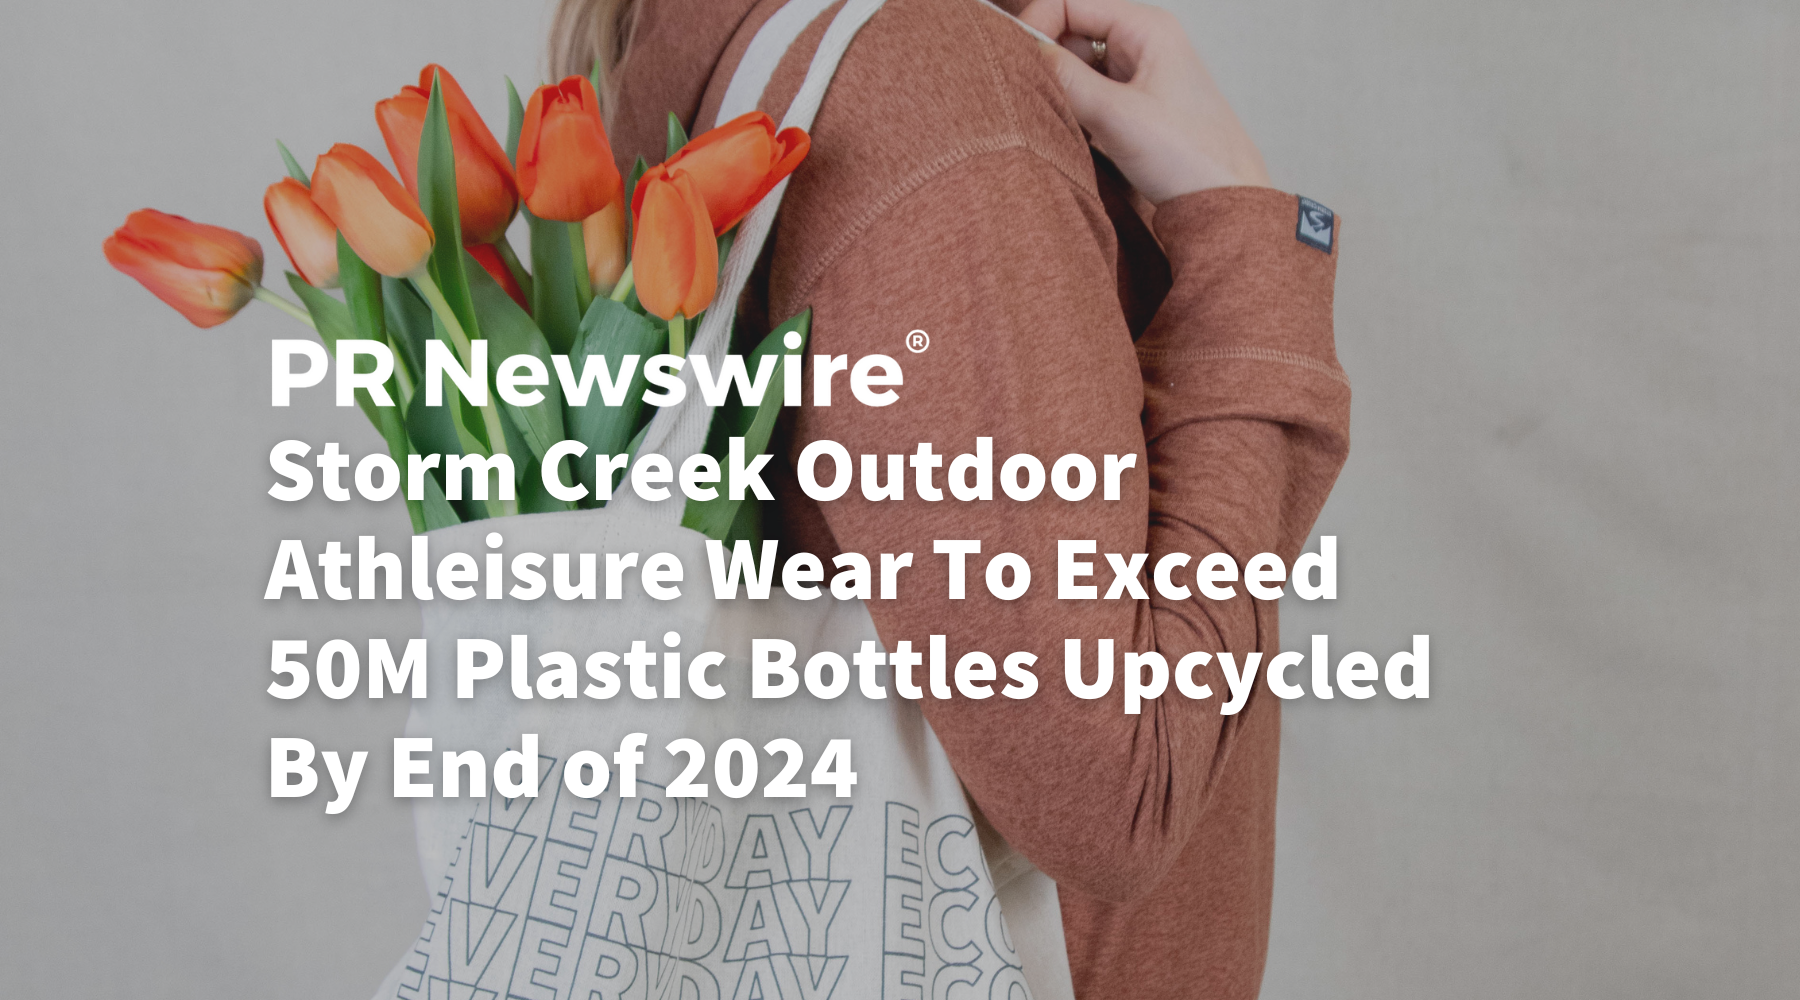 Storm Creek Outdoor Athleisure Wear To Exceed 50M Plastic Bottles Upcycled By End of 2024